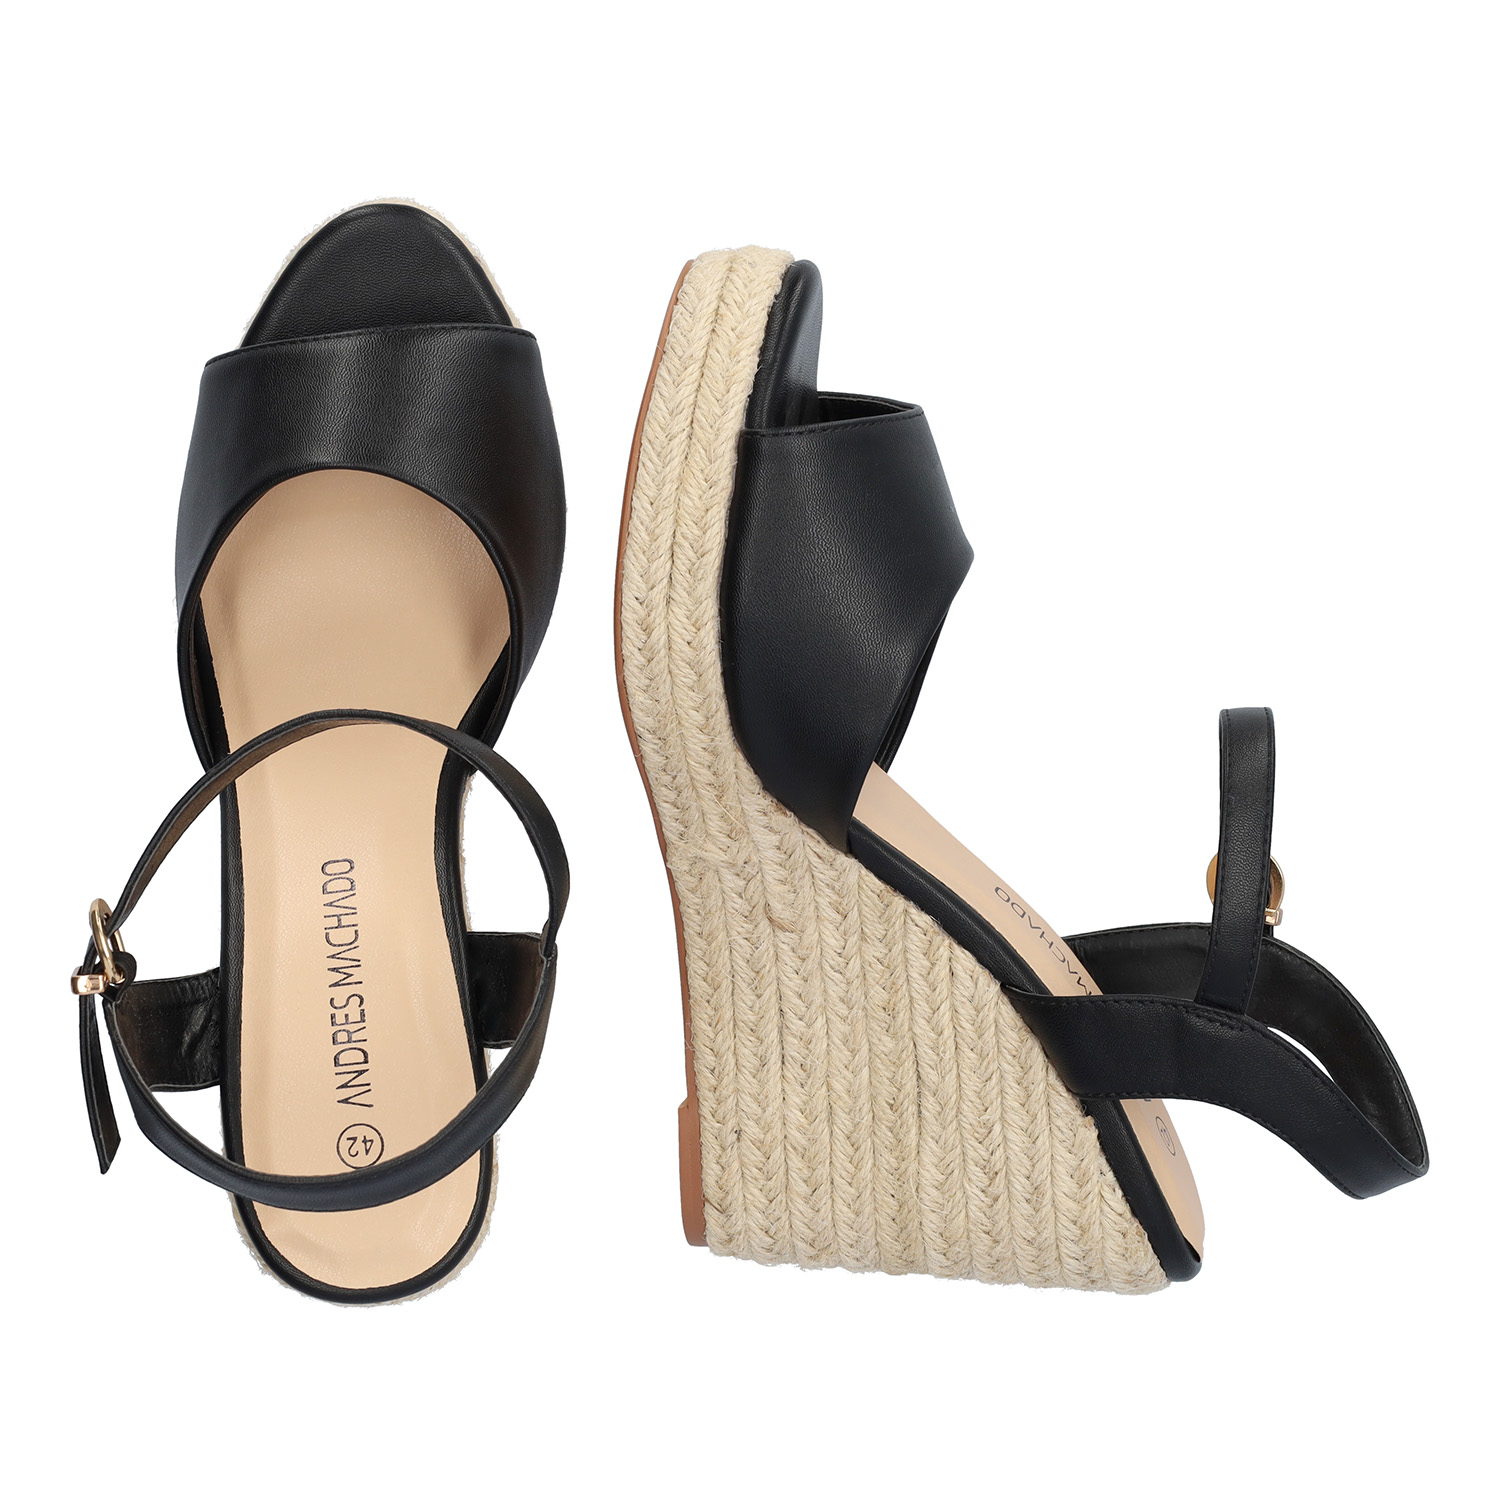 Black soft fabric sandal with a jute wedge 